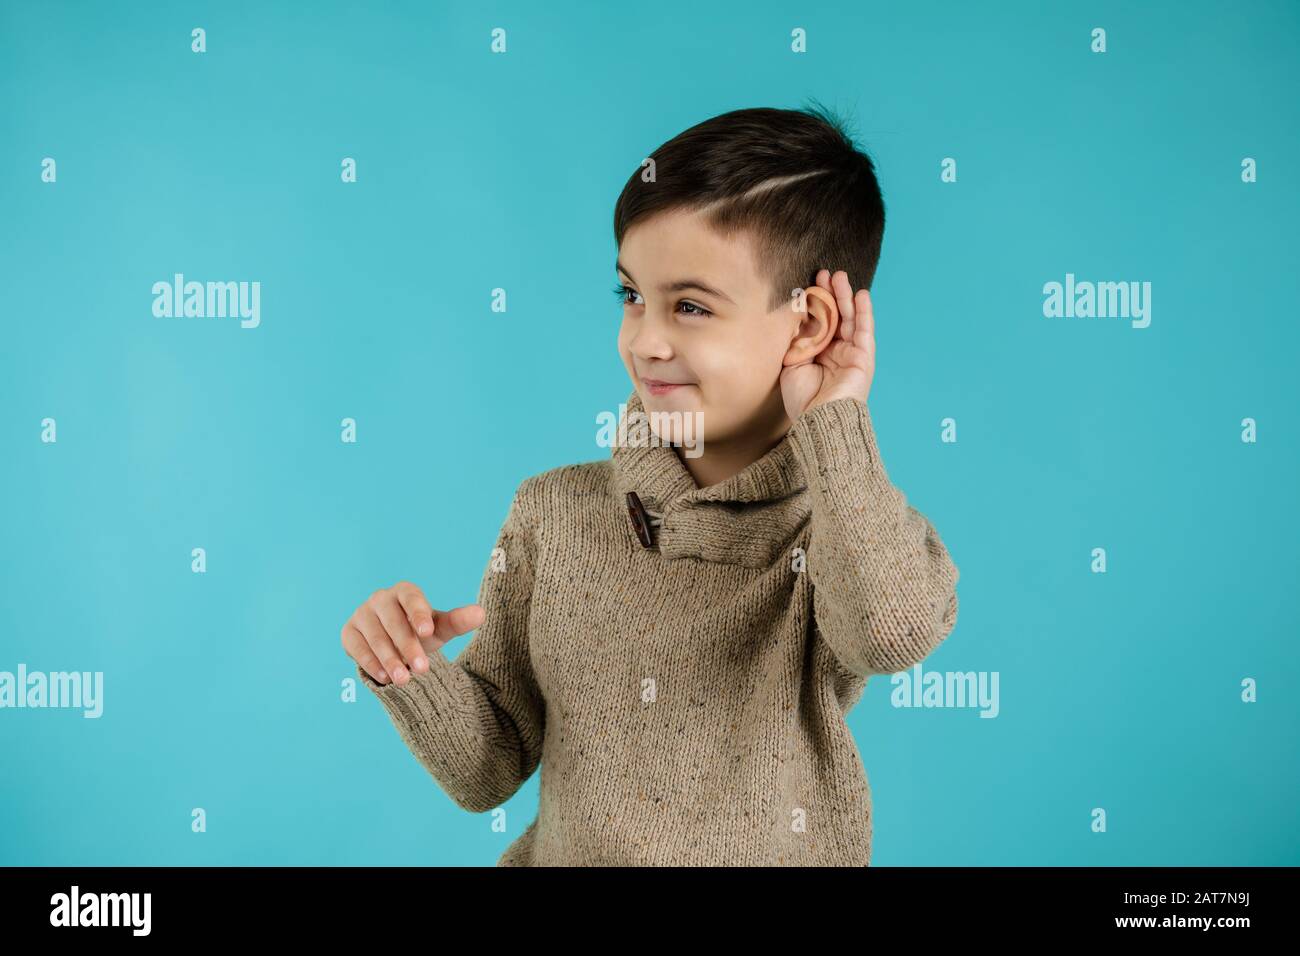 happy little child boy making hearing gesture on blue background. facial expression. kid with hand over ear listening gossip. Stock Photo